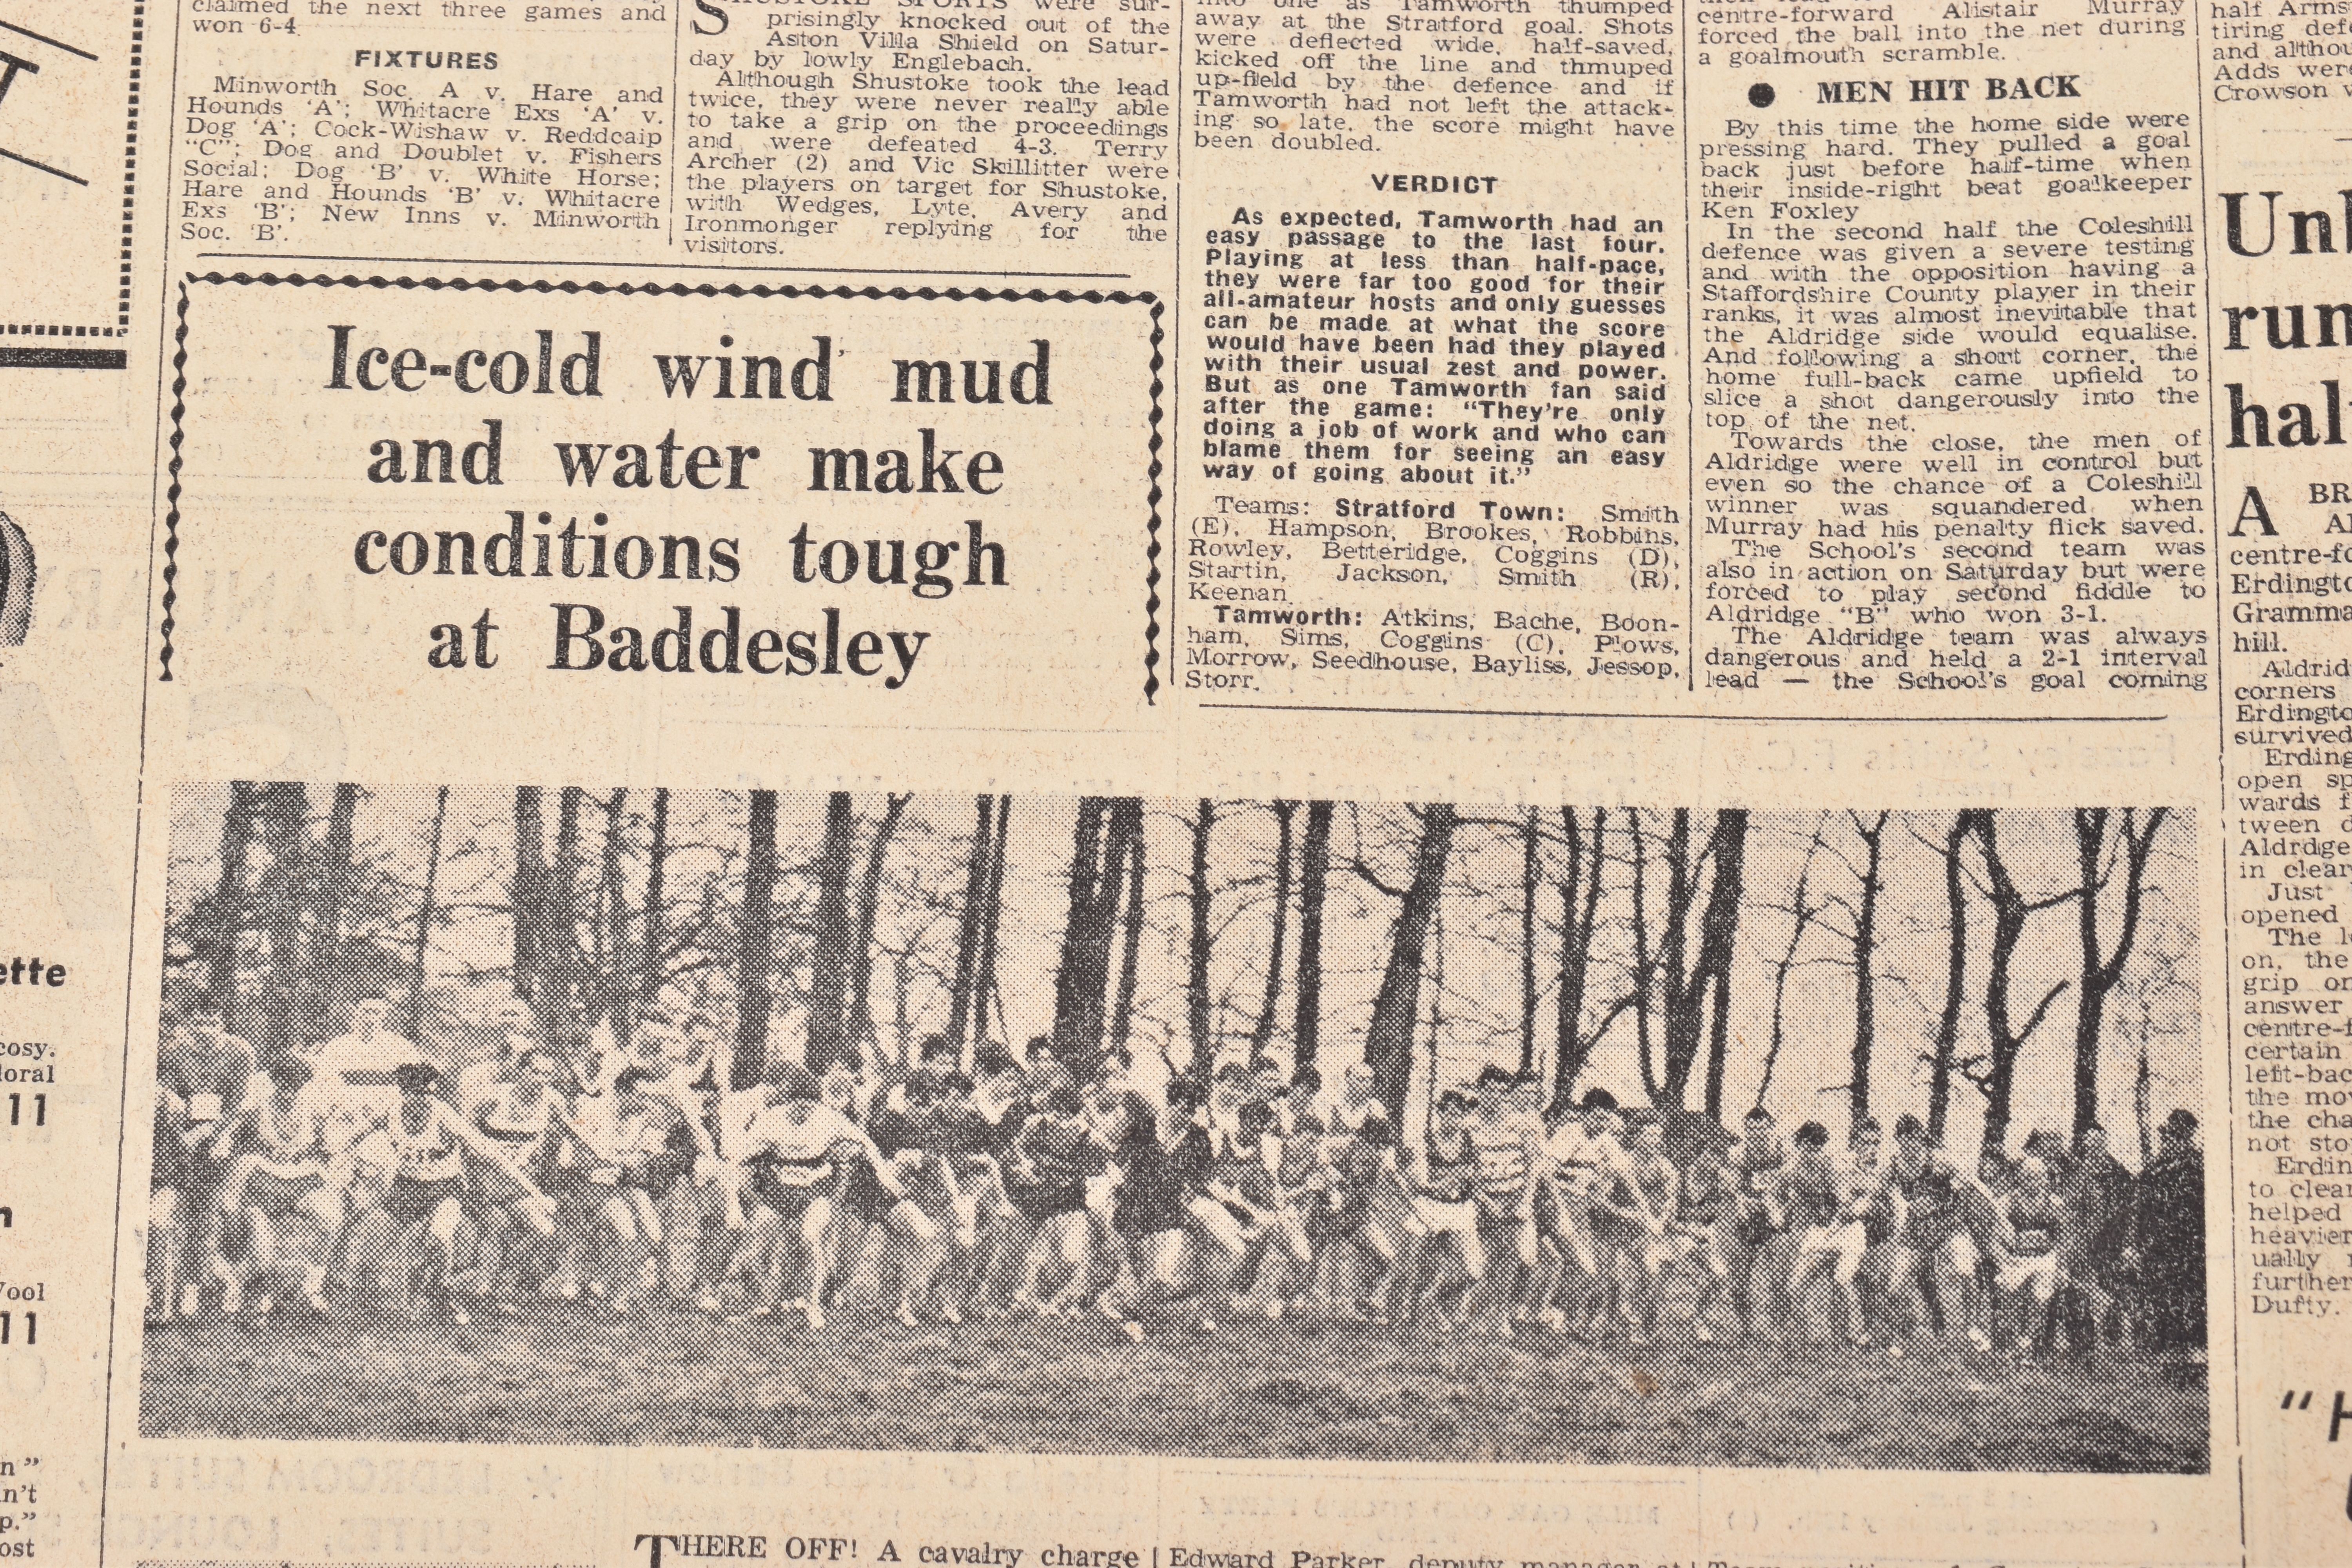 THE TAMWORTH HERALD, an Archive of the Tamworth Herald Newspaper from 1966, the newspapers are bound - Image 9 of 14